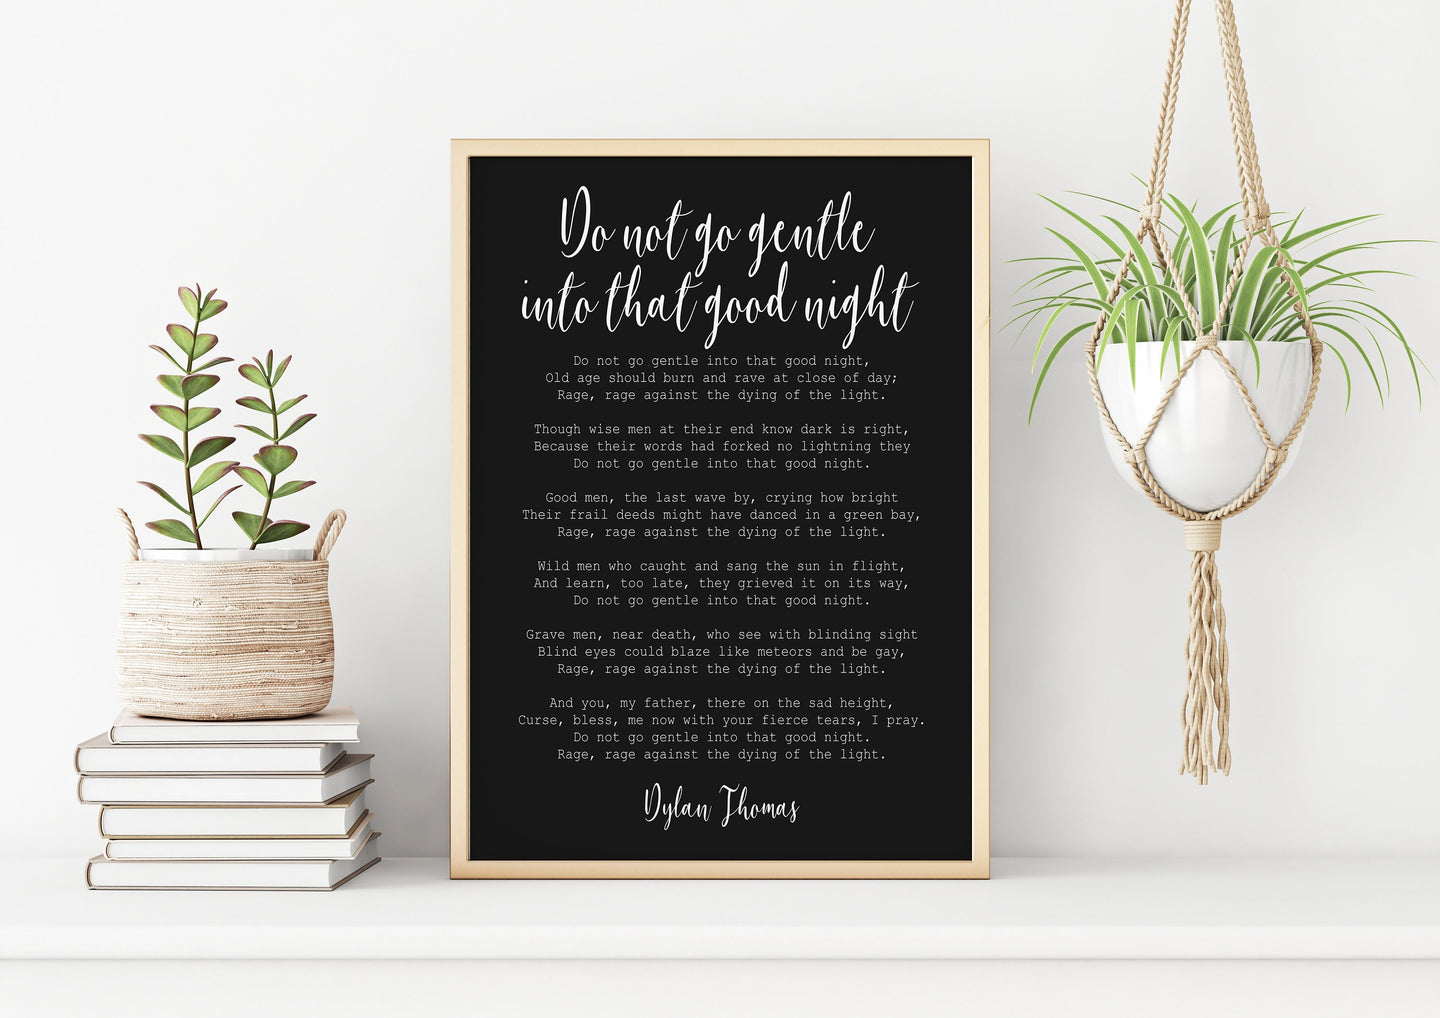 Dylan Thomas Poem Print - Do not go gentle into that good night - bedroom decor print, poetry poster UNFRAMED